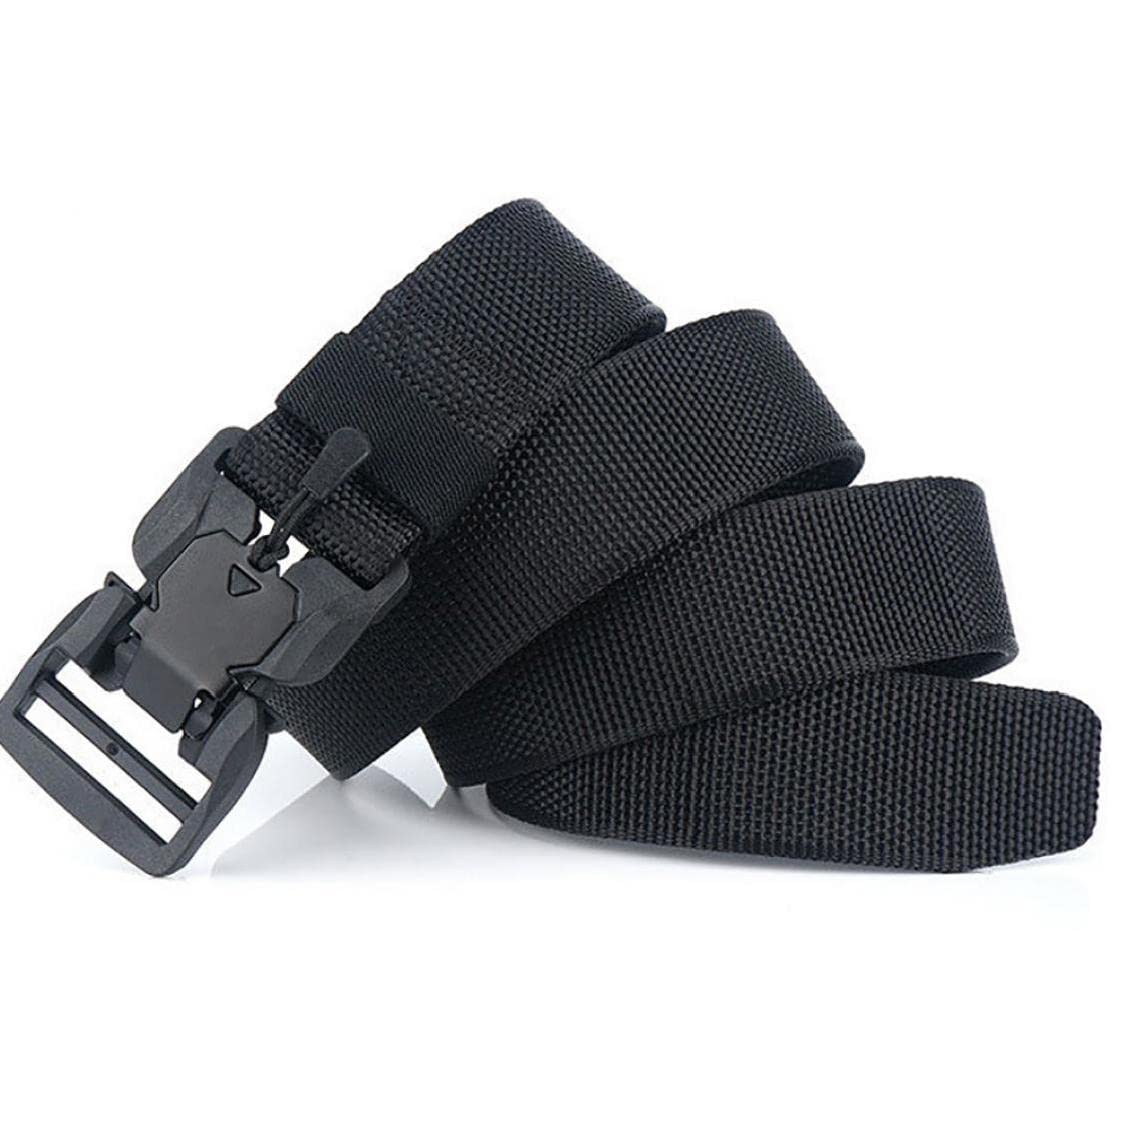 Belt Abs Resin Quick Release Magnetic Buckle Military Belt Soft Genuine Nylon Sports Accessories for Men Women